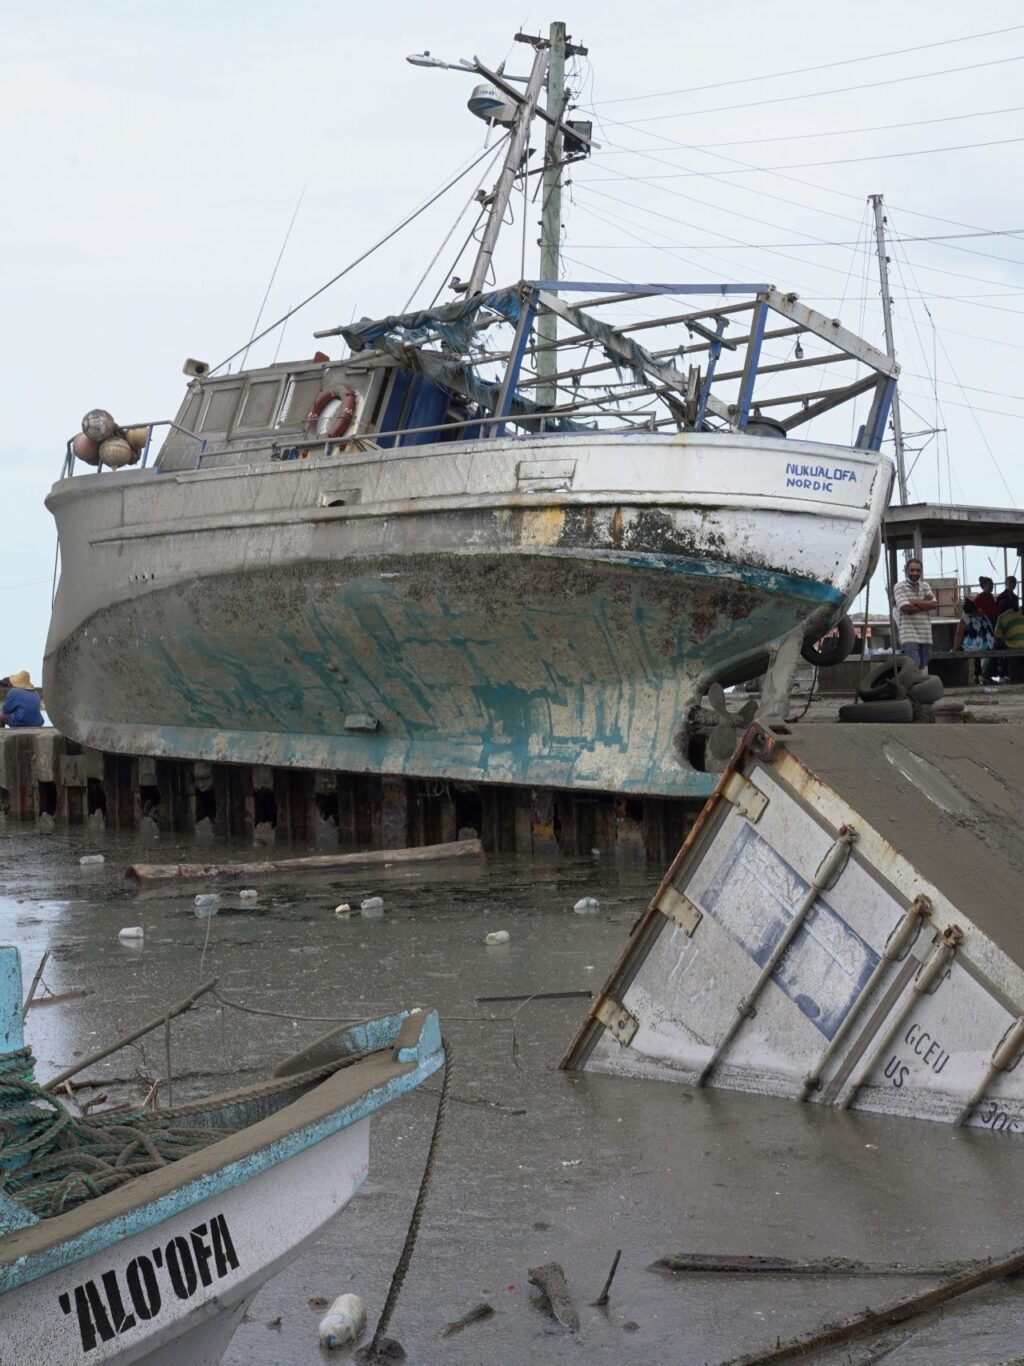 A large boat lies out of the water and near a pier after a tsunami hit.